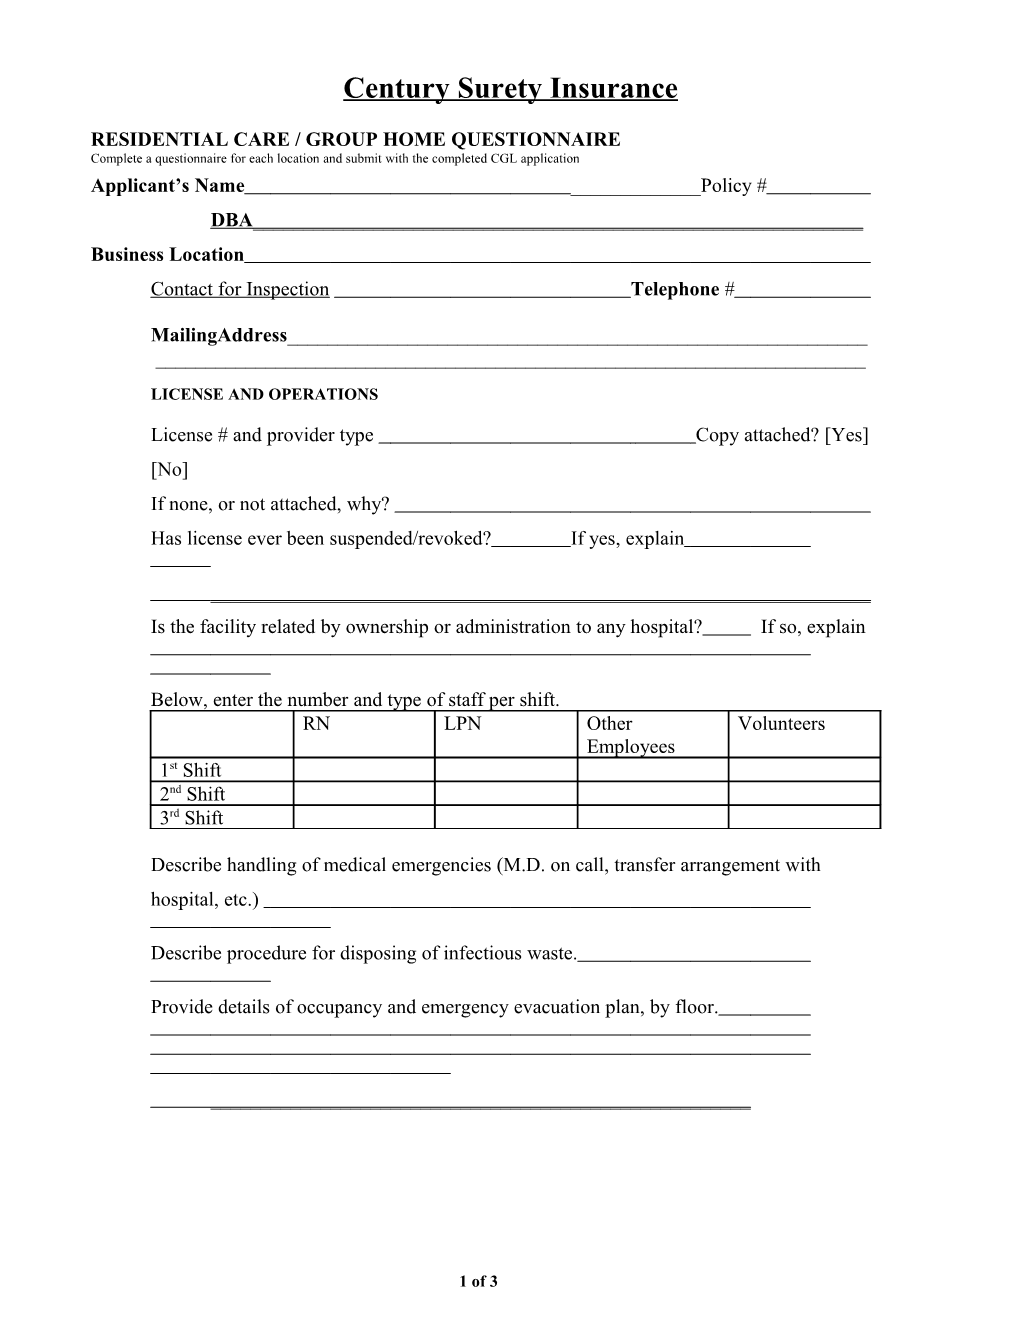 Residential Care / Group Home Questionnaire